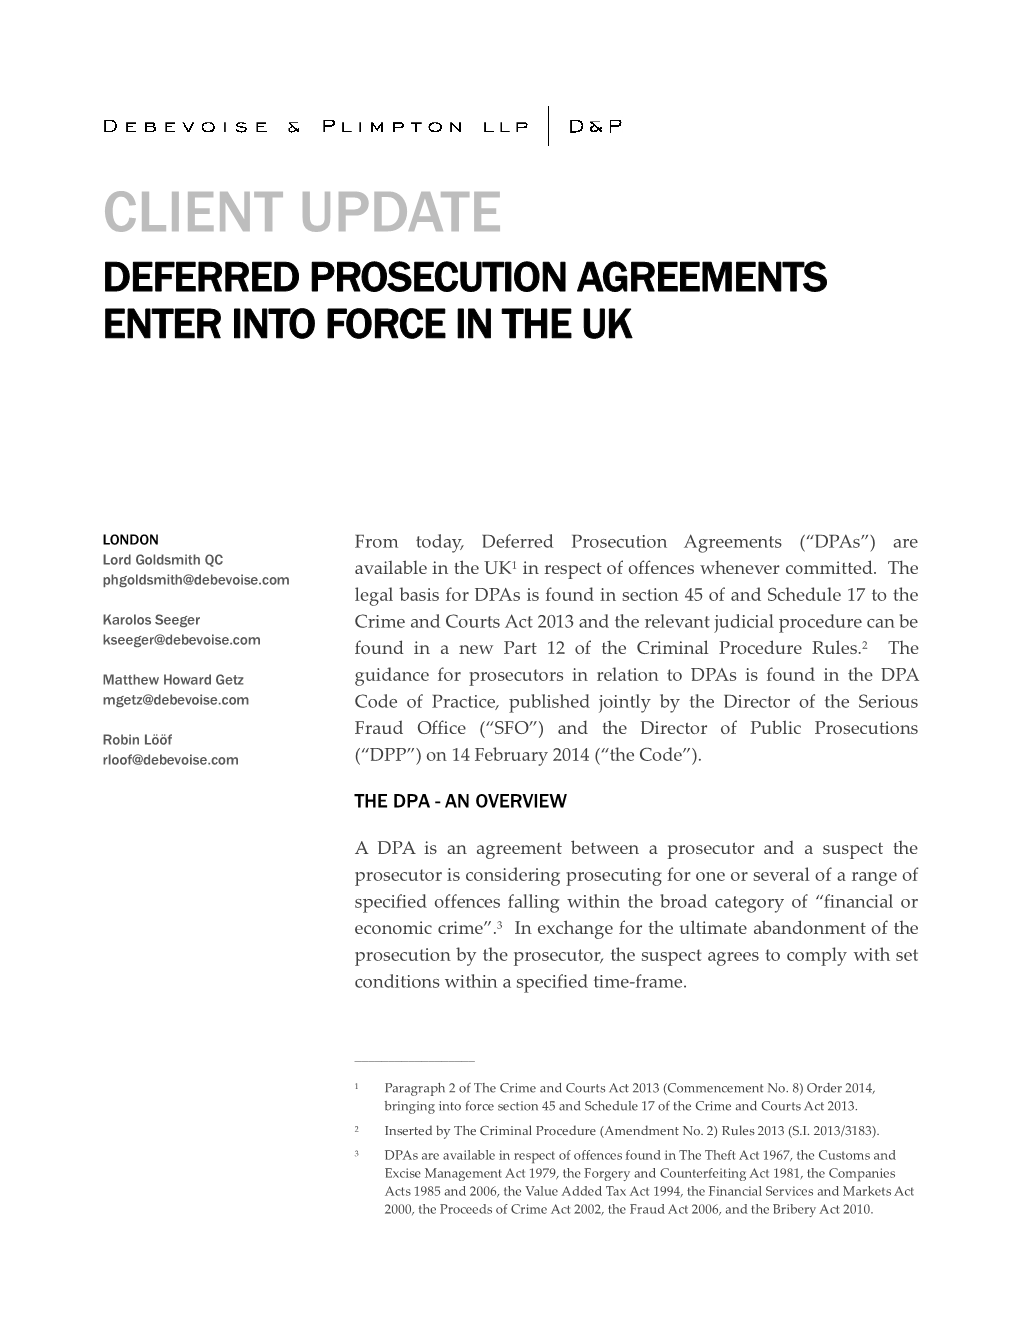 Client Update Deferred Prosecution Agreements Enter Into Force in the Uk